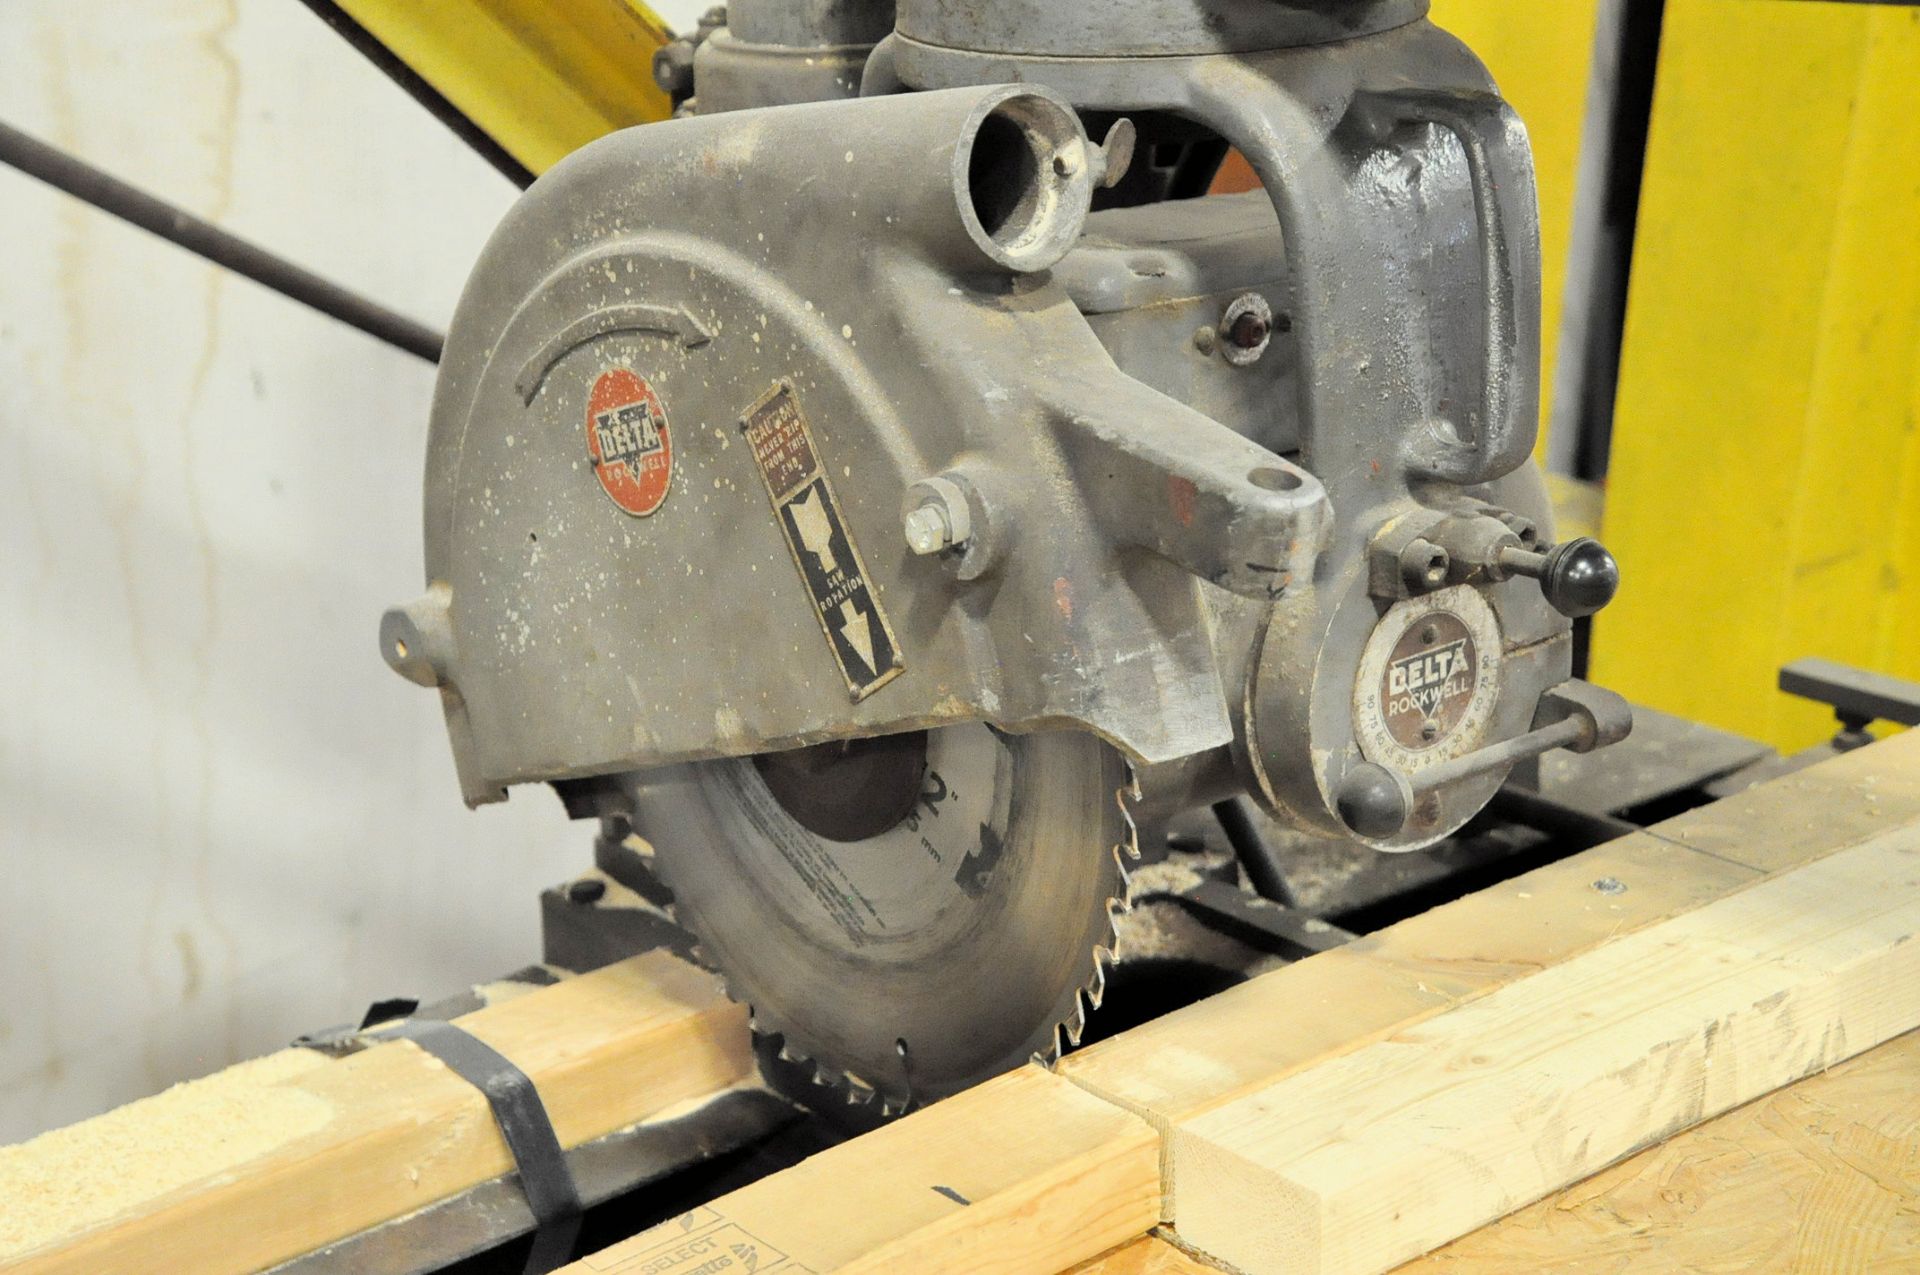 Delta Rockwell 12" Radial Arm Saw, Loading Fee $100.00 - Image 4 of 5